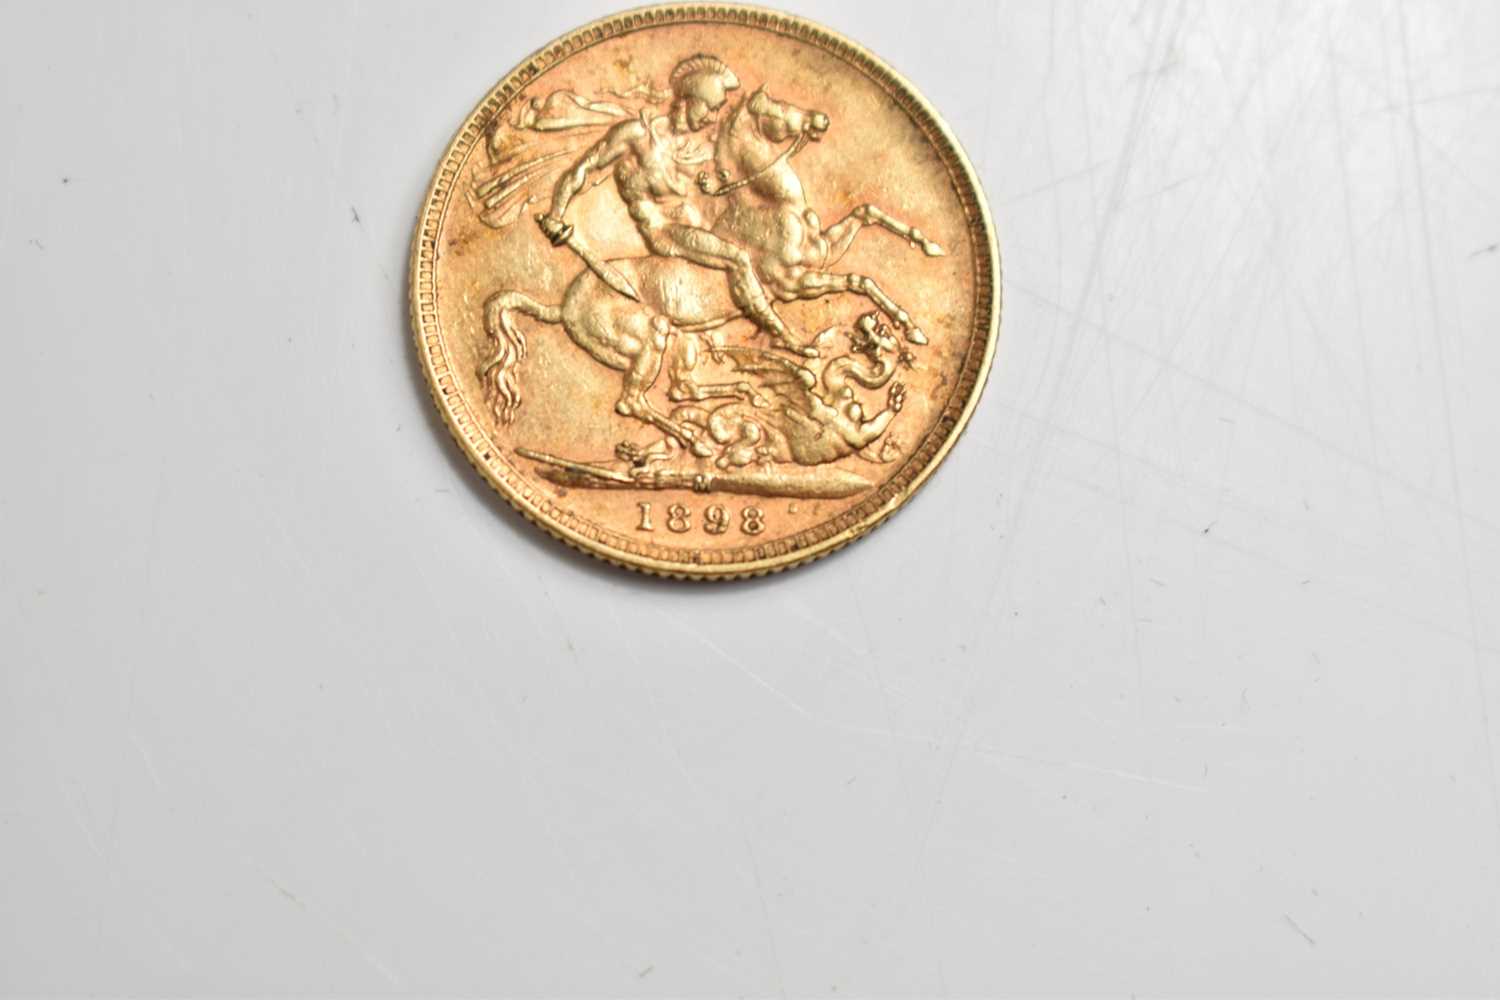 A Queen Victoria full gold sovereign, veiled head, Melbourne mint mark, dated 1898. - Image 3 of 3